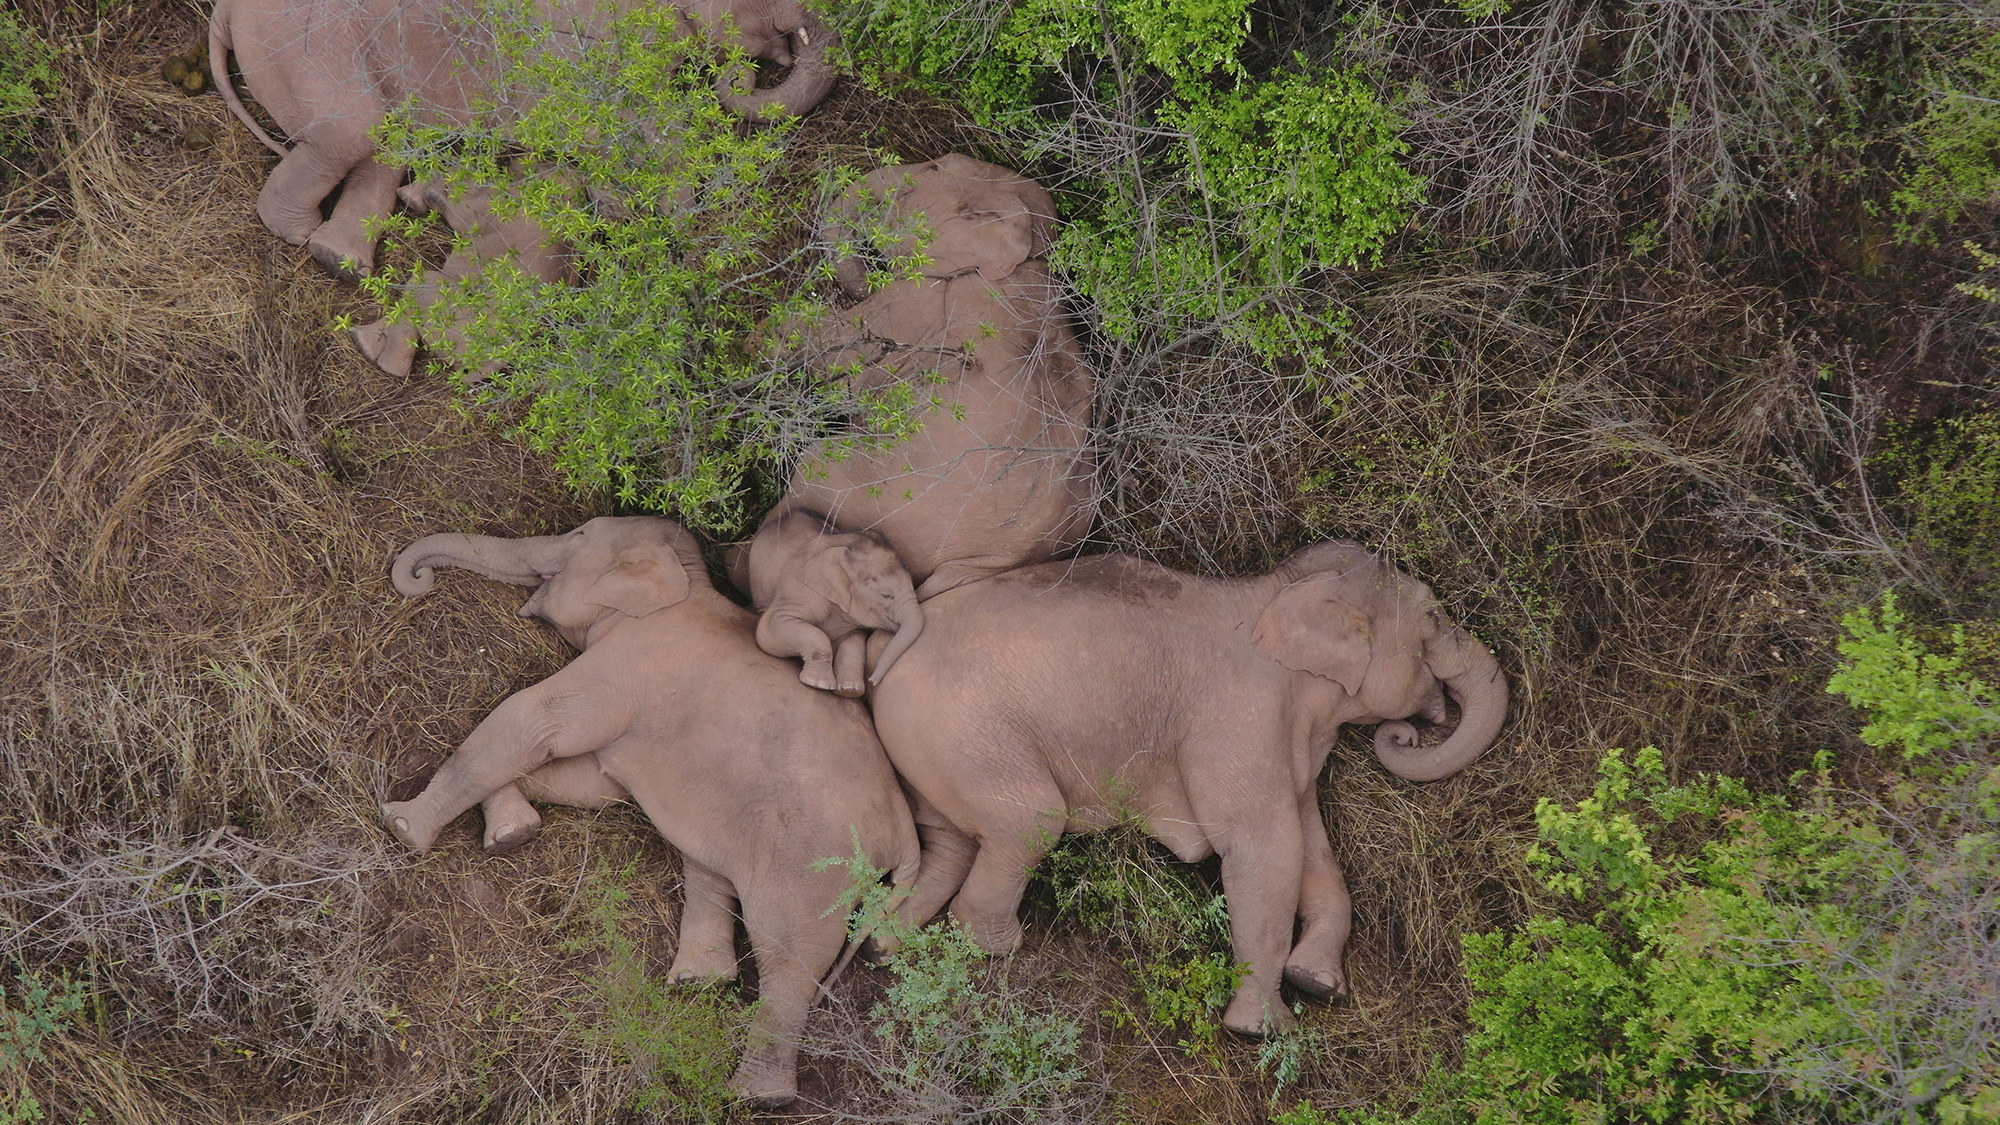 At least four adult elephants, including one baby elephant, rest in a meadow